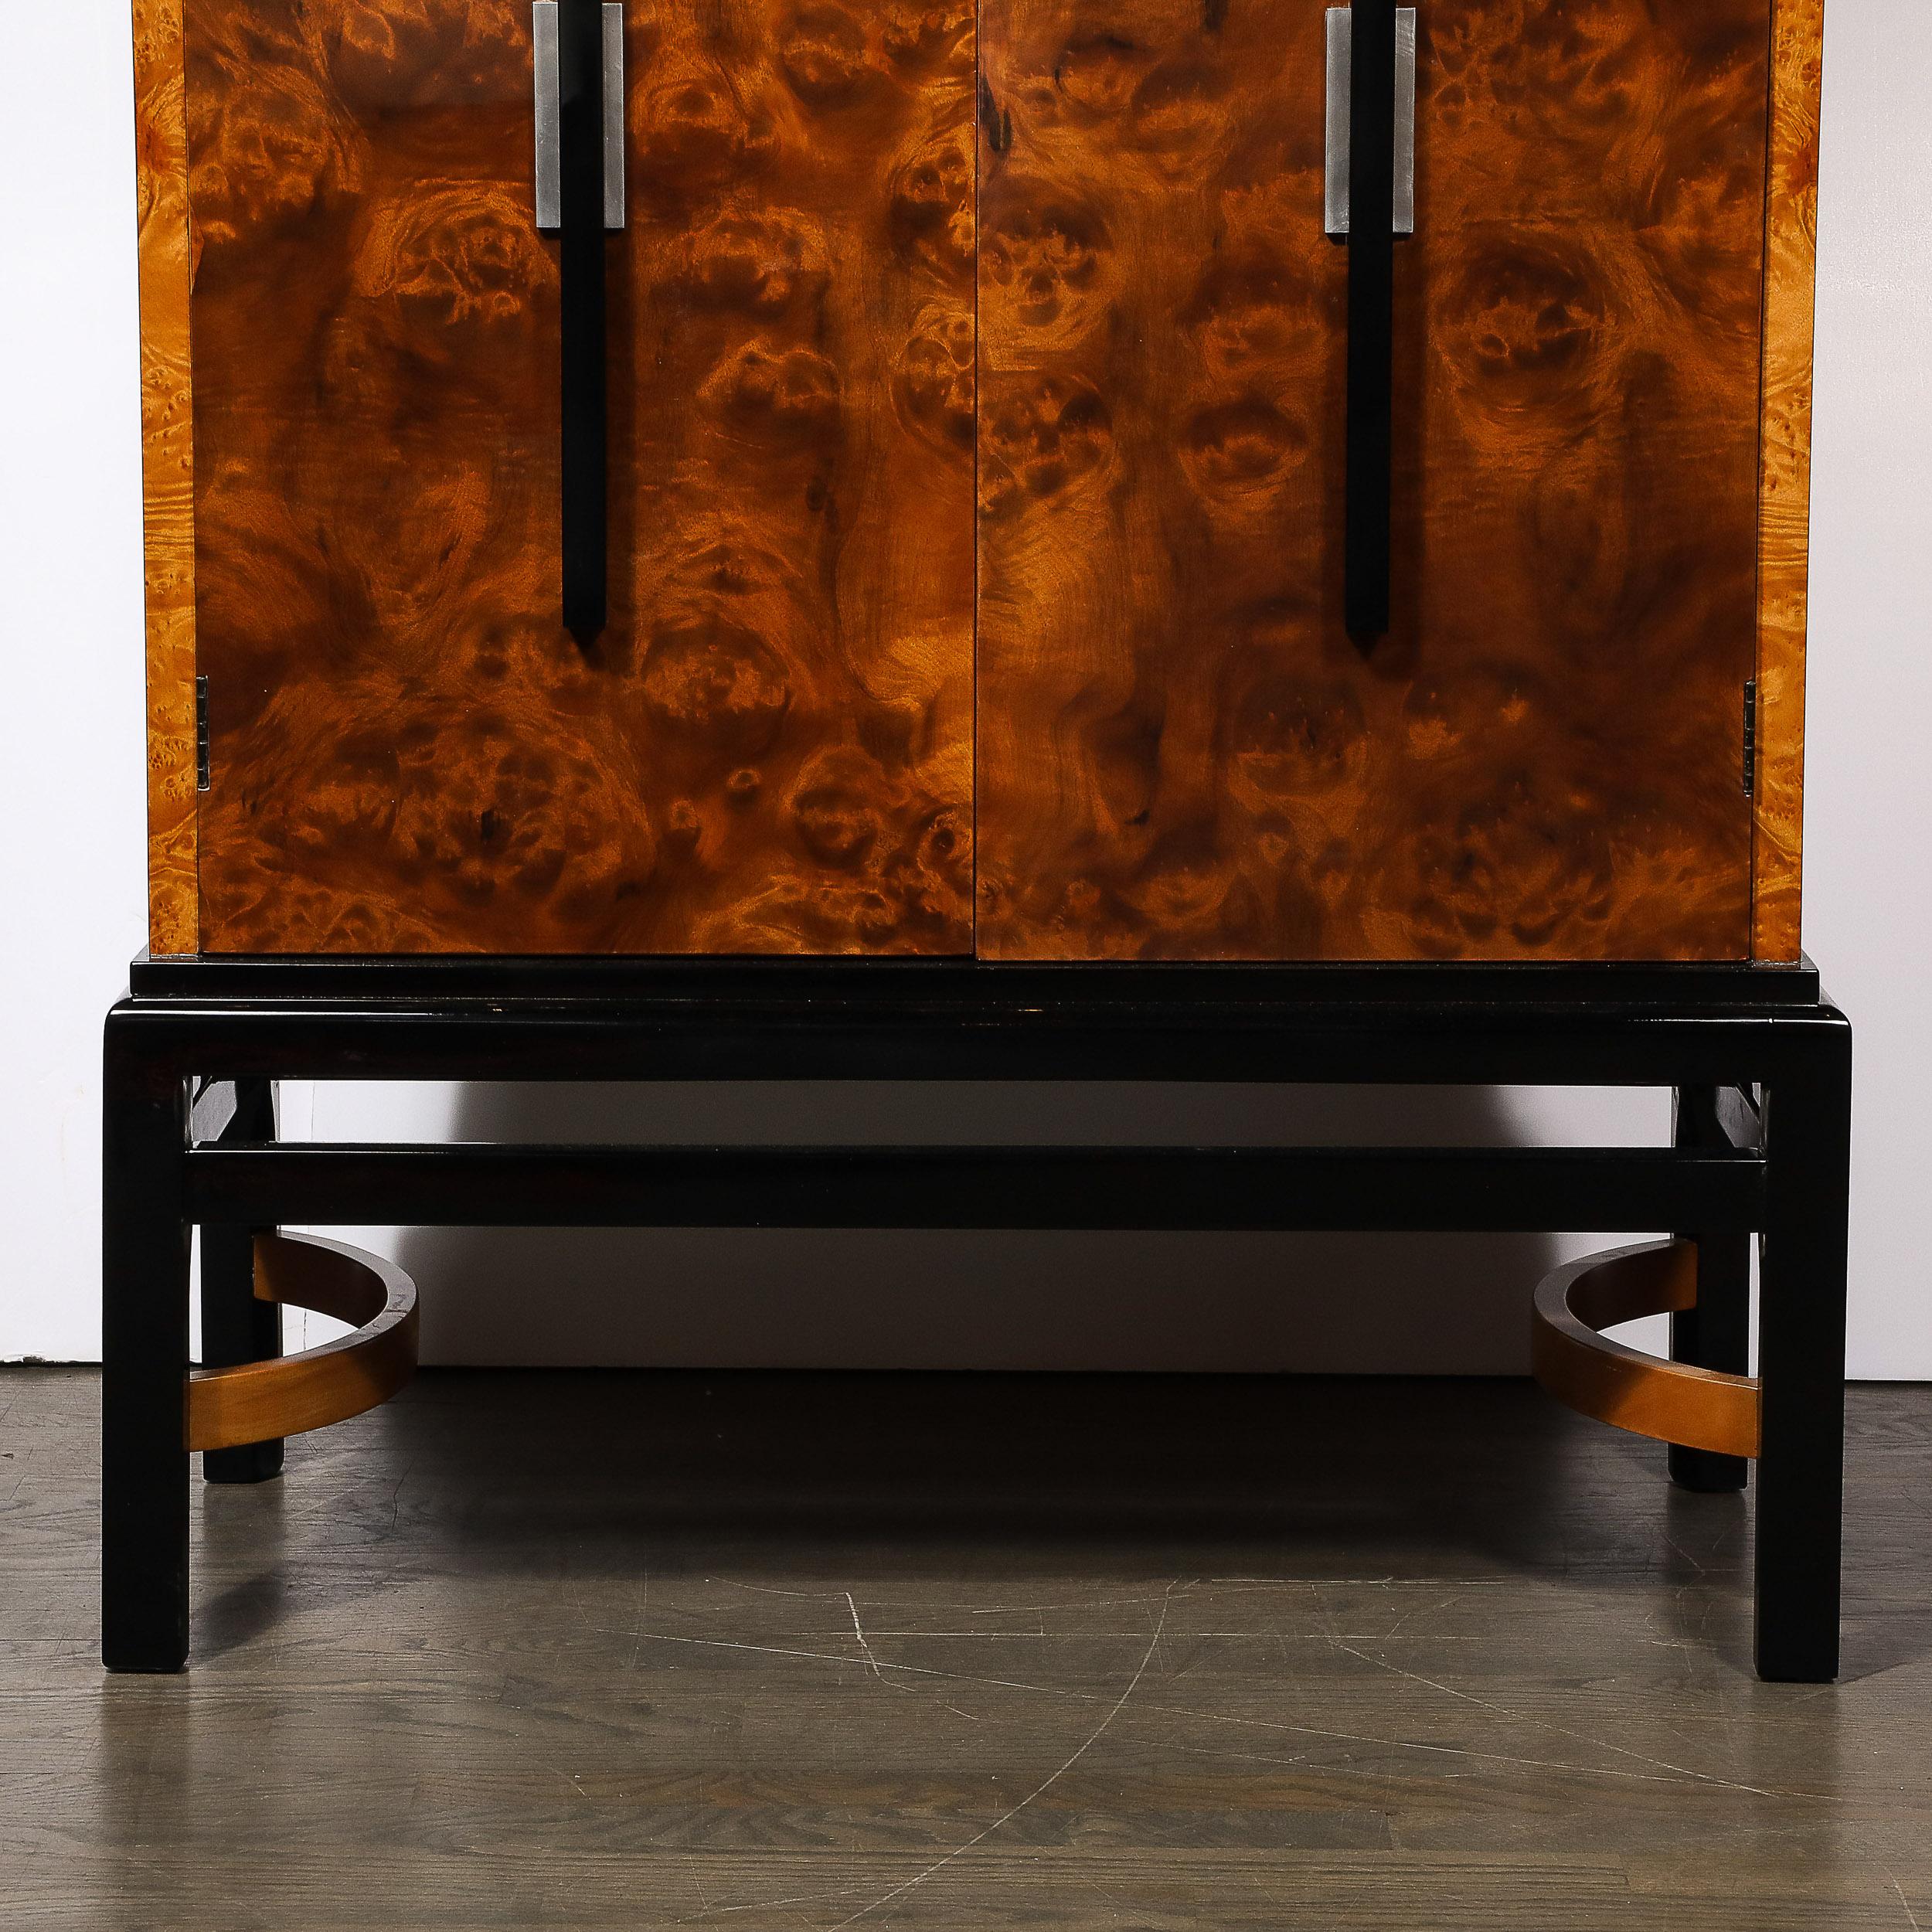 Aluminum Art Deco Burled Walnut Bar Cabinet by Donald Deskey for the Hastings Company For Sale